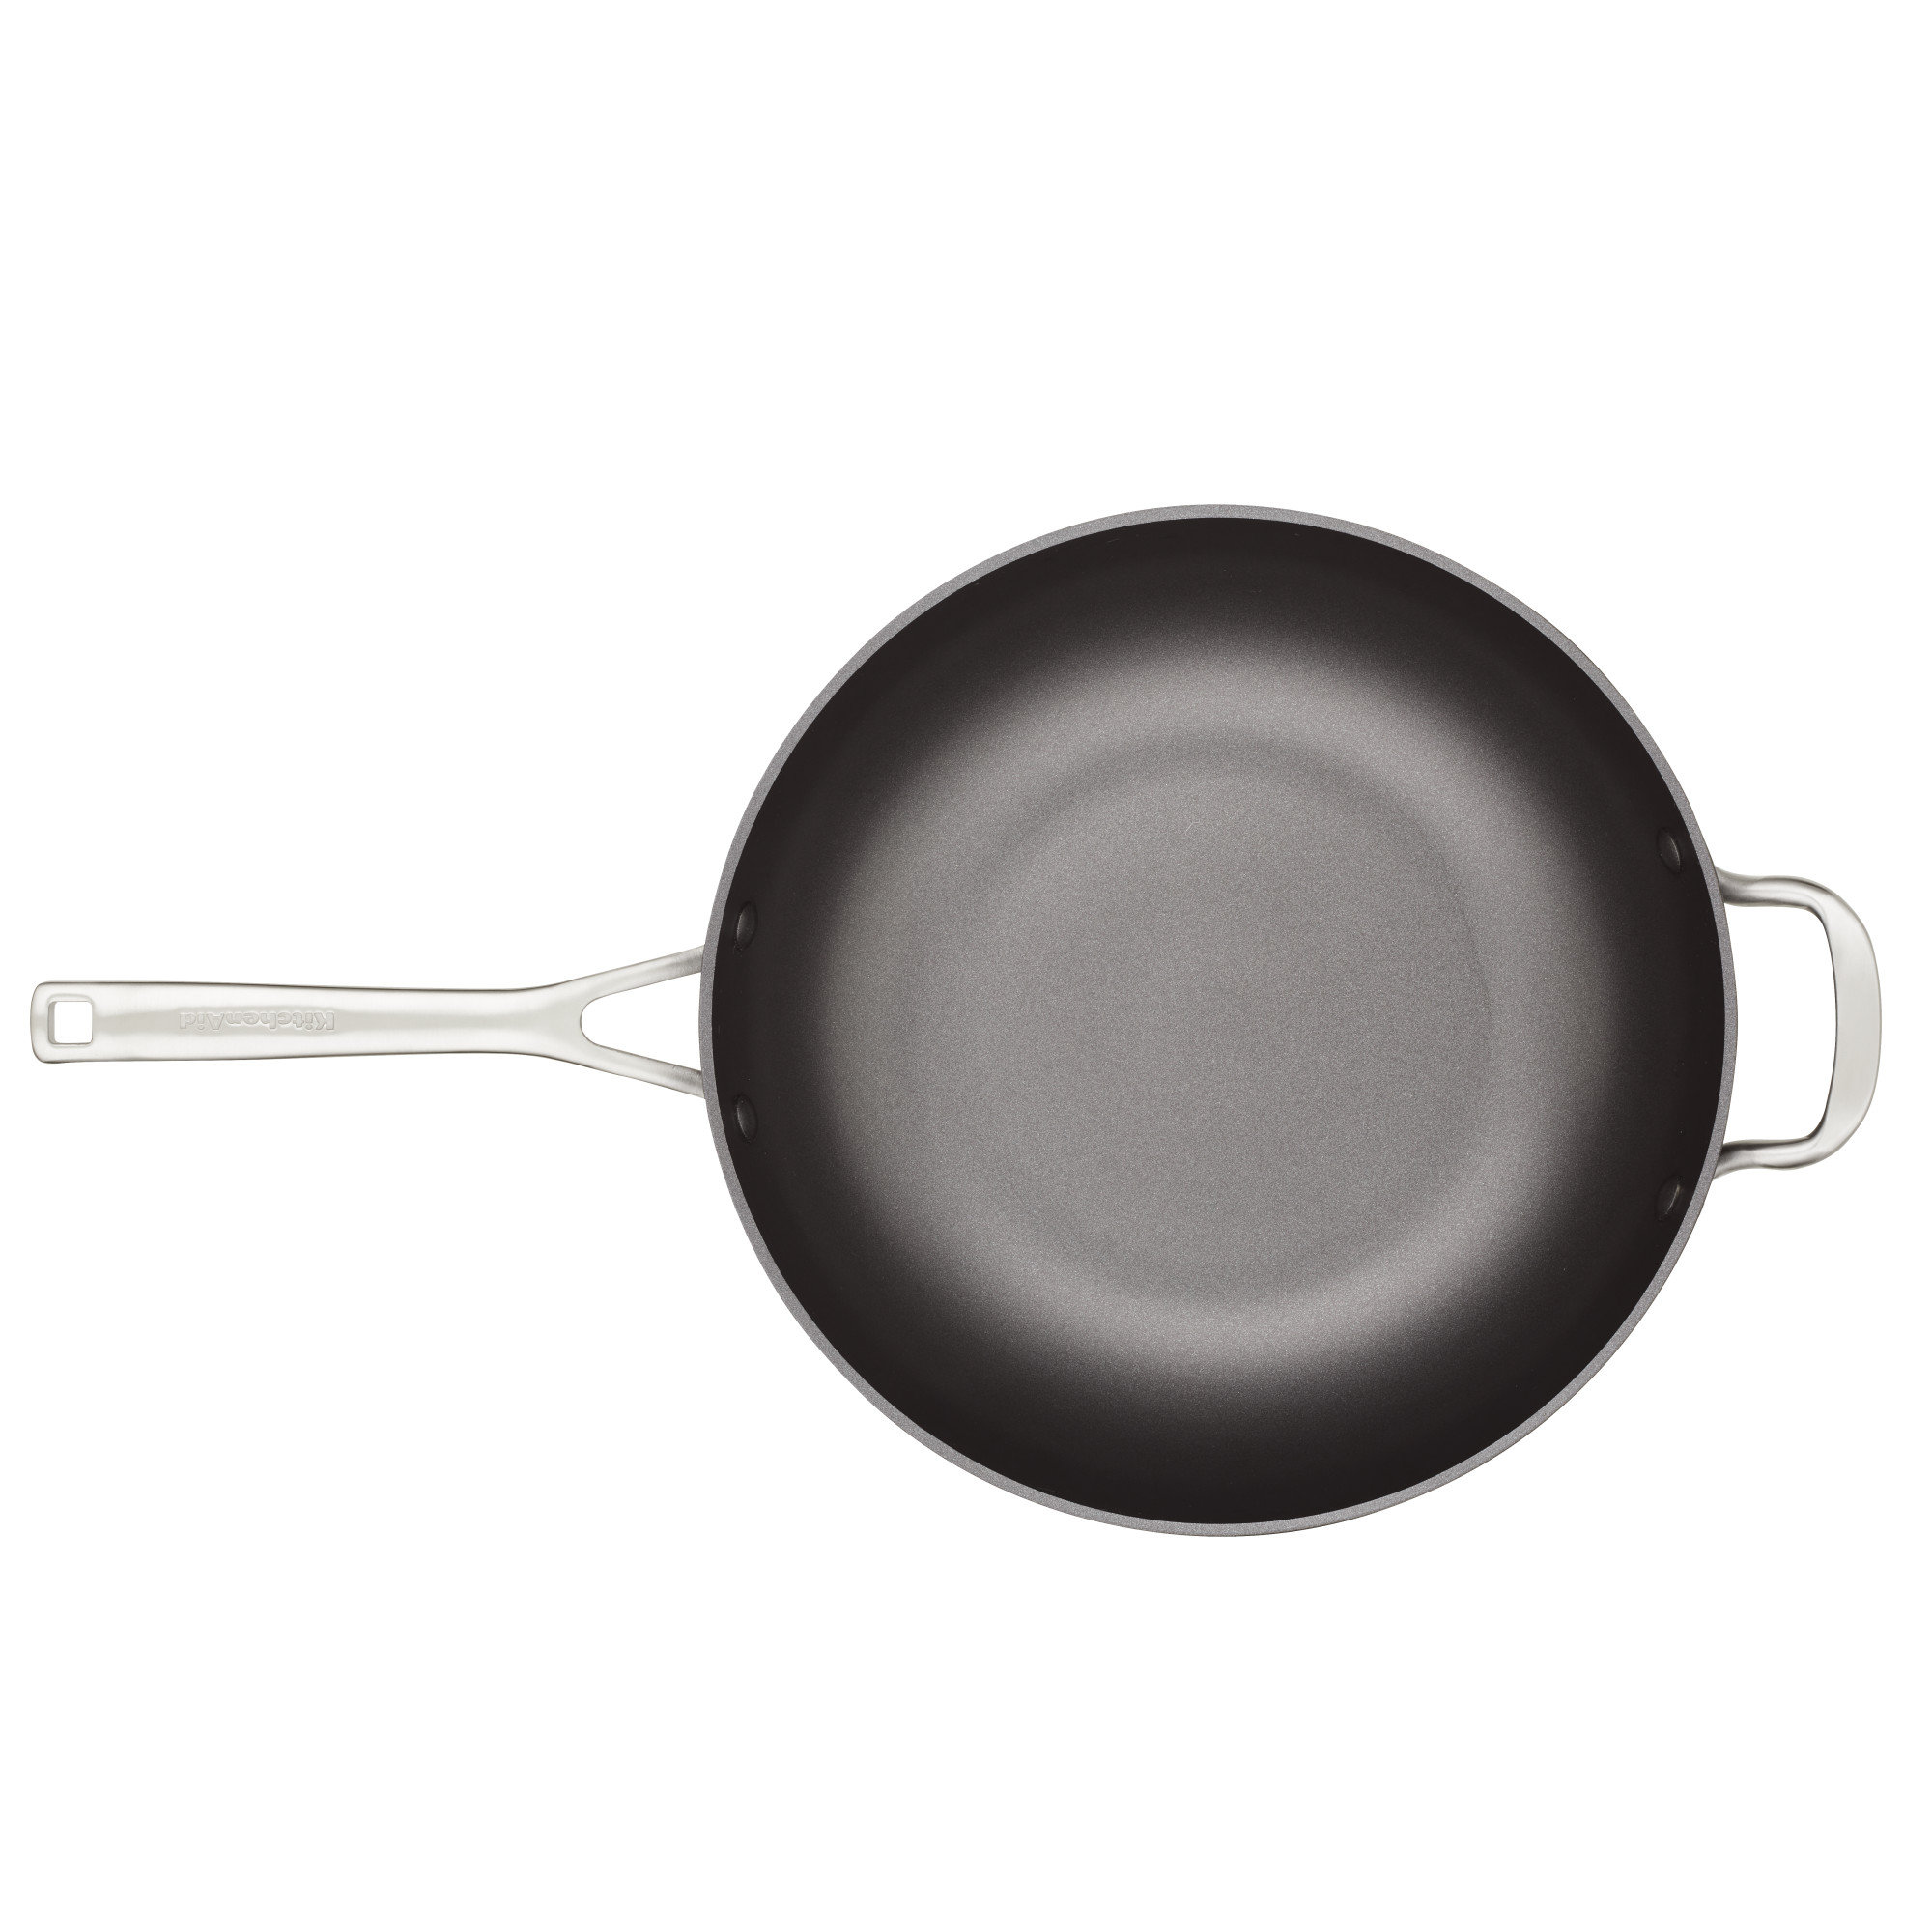 KitchenAid Hard-Anodized Induction Nonstick Wok with Helper Handle